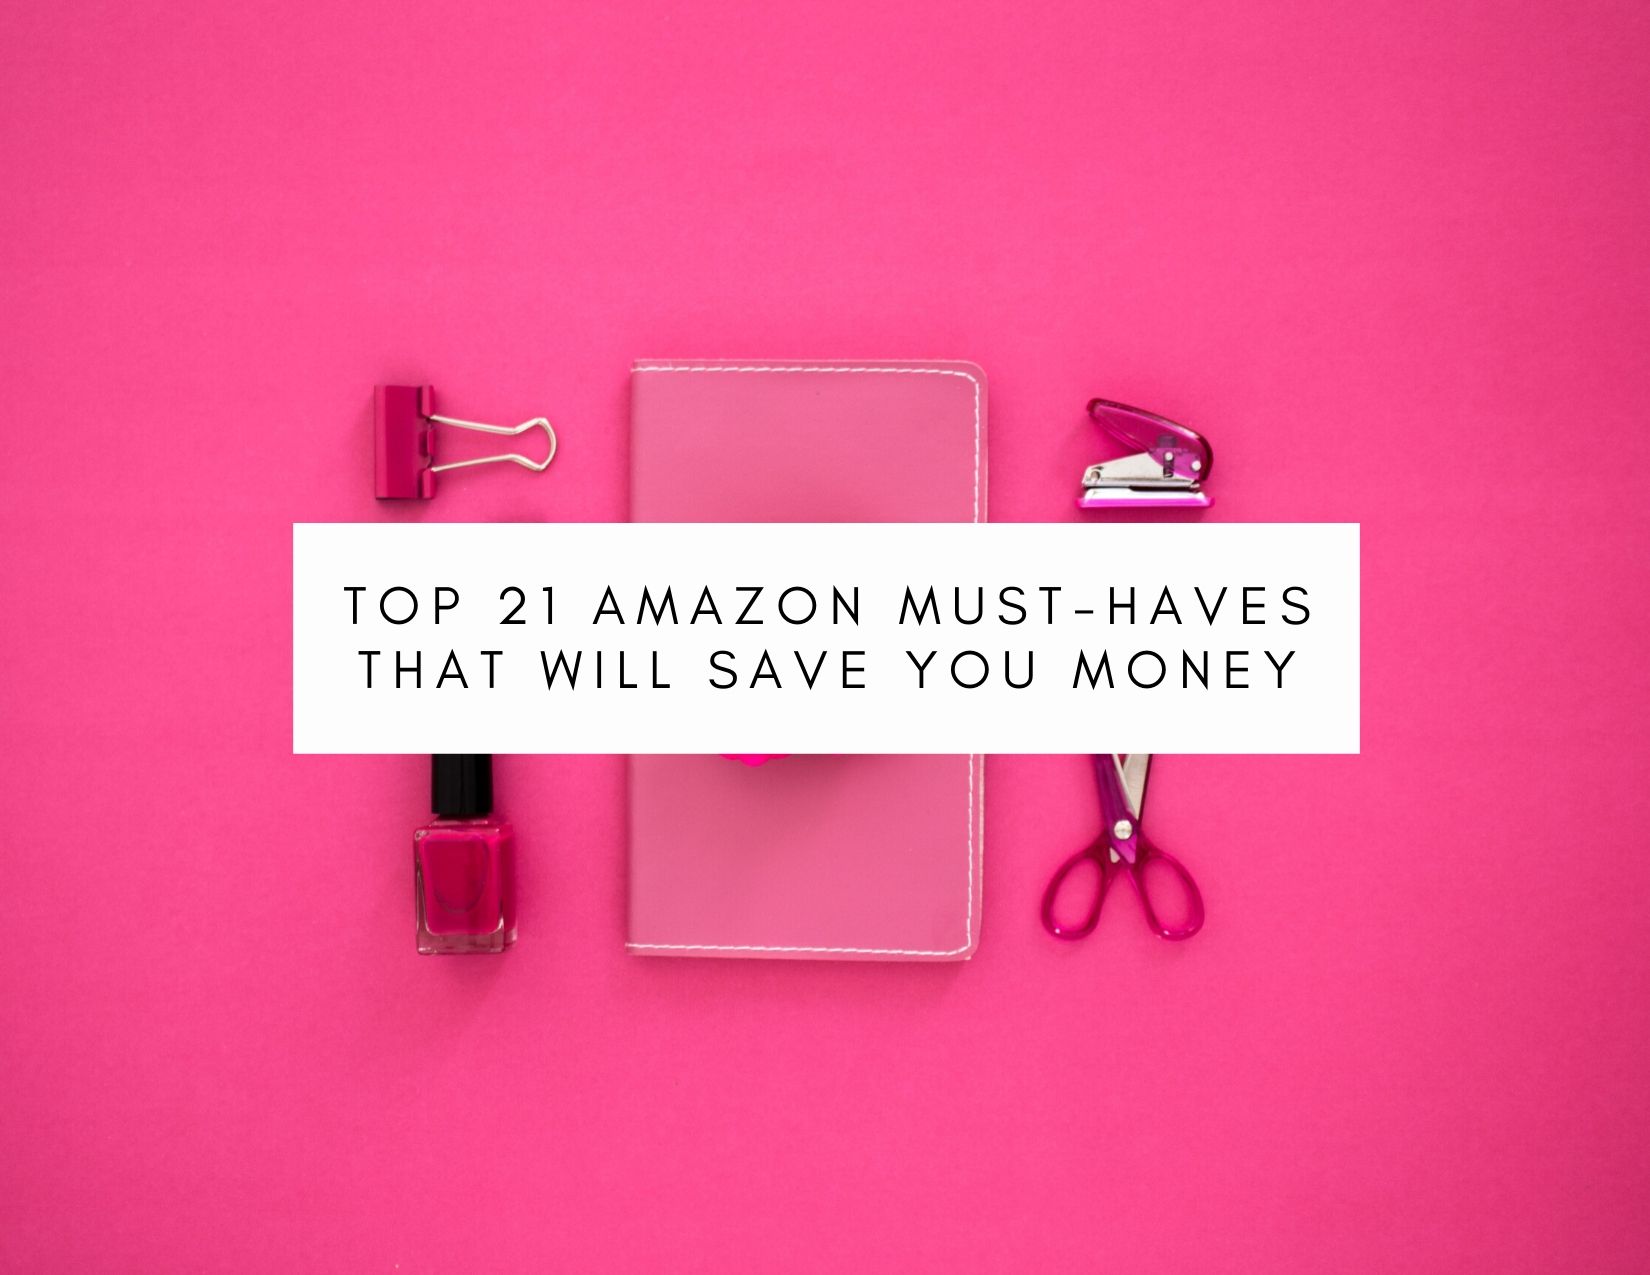 Top 21 Amazon Must-Haves That Will Save You Money